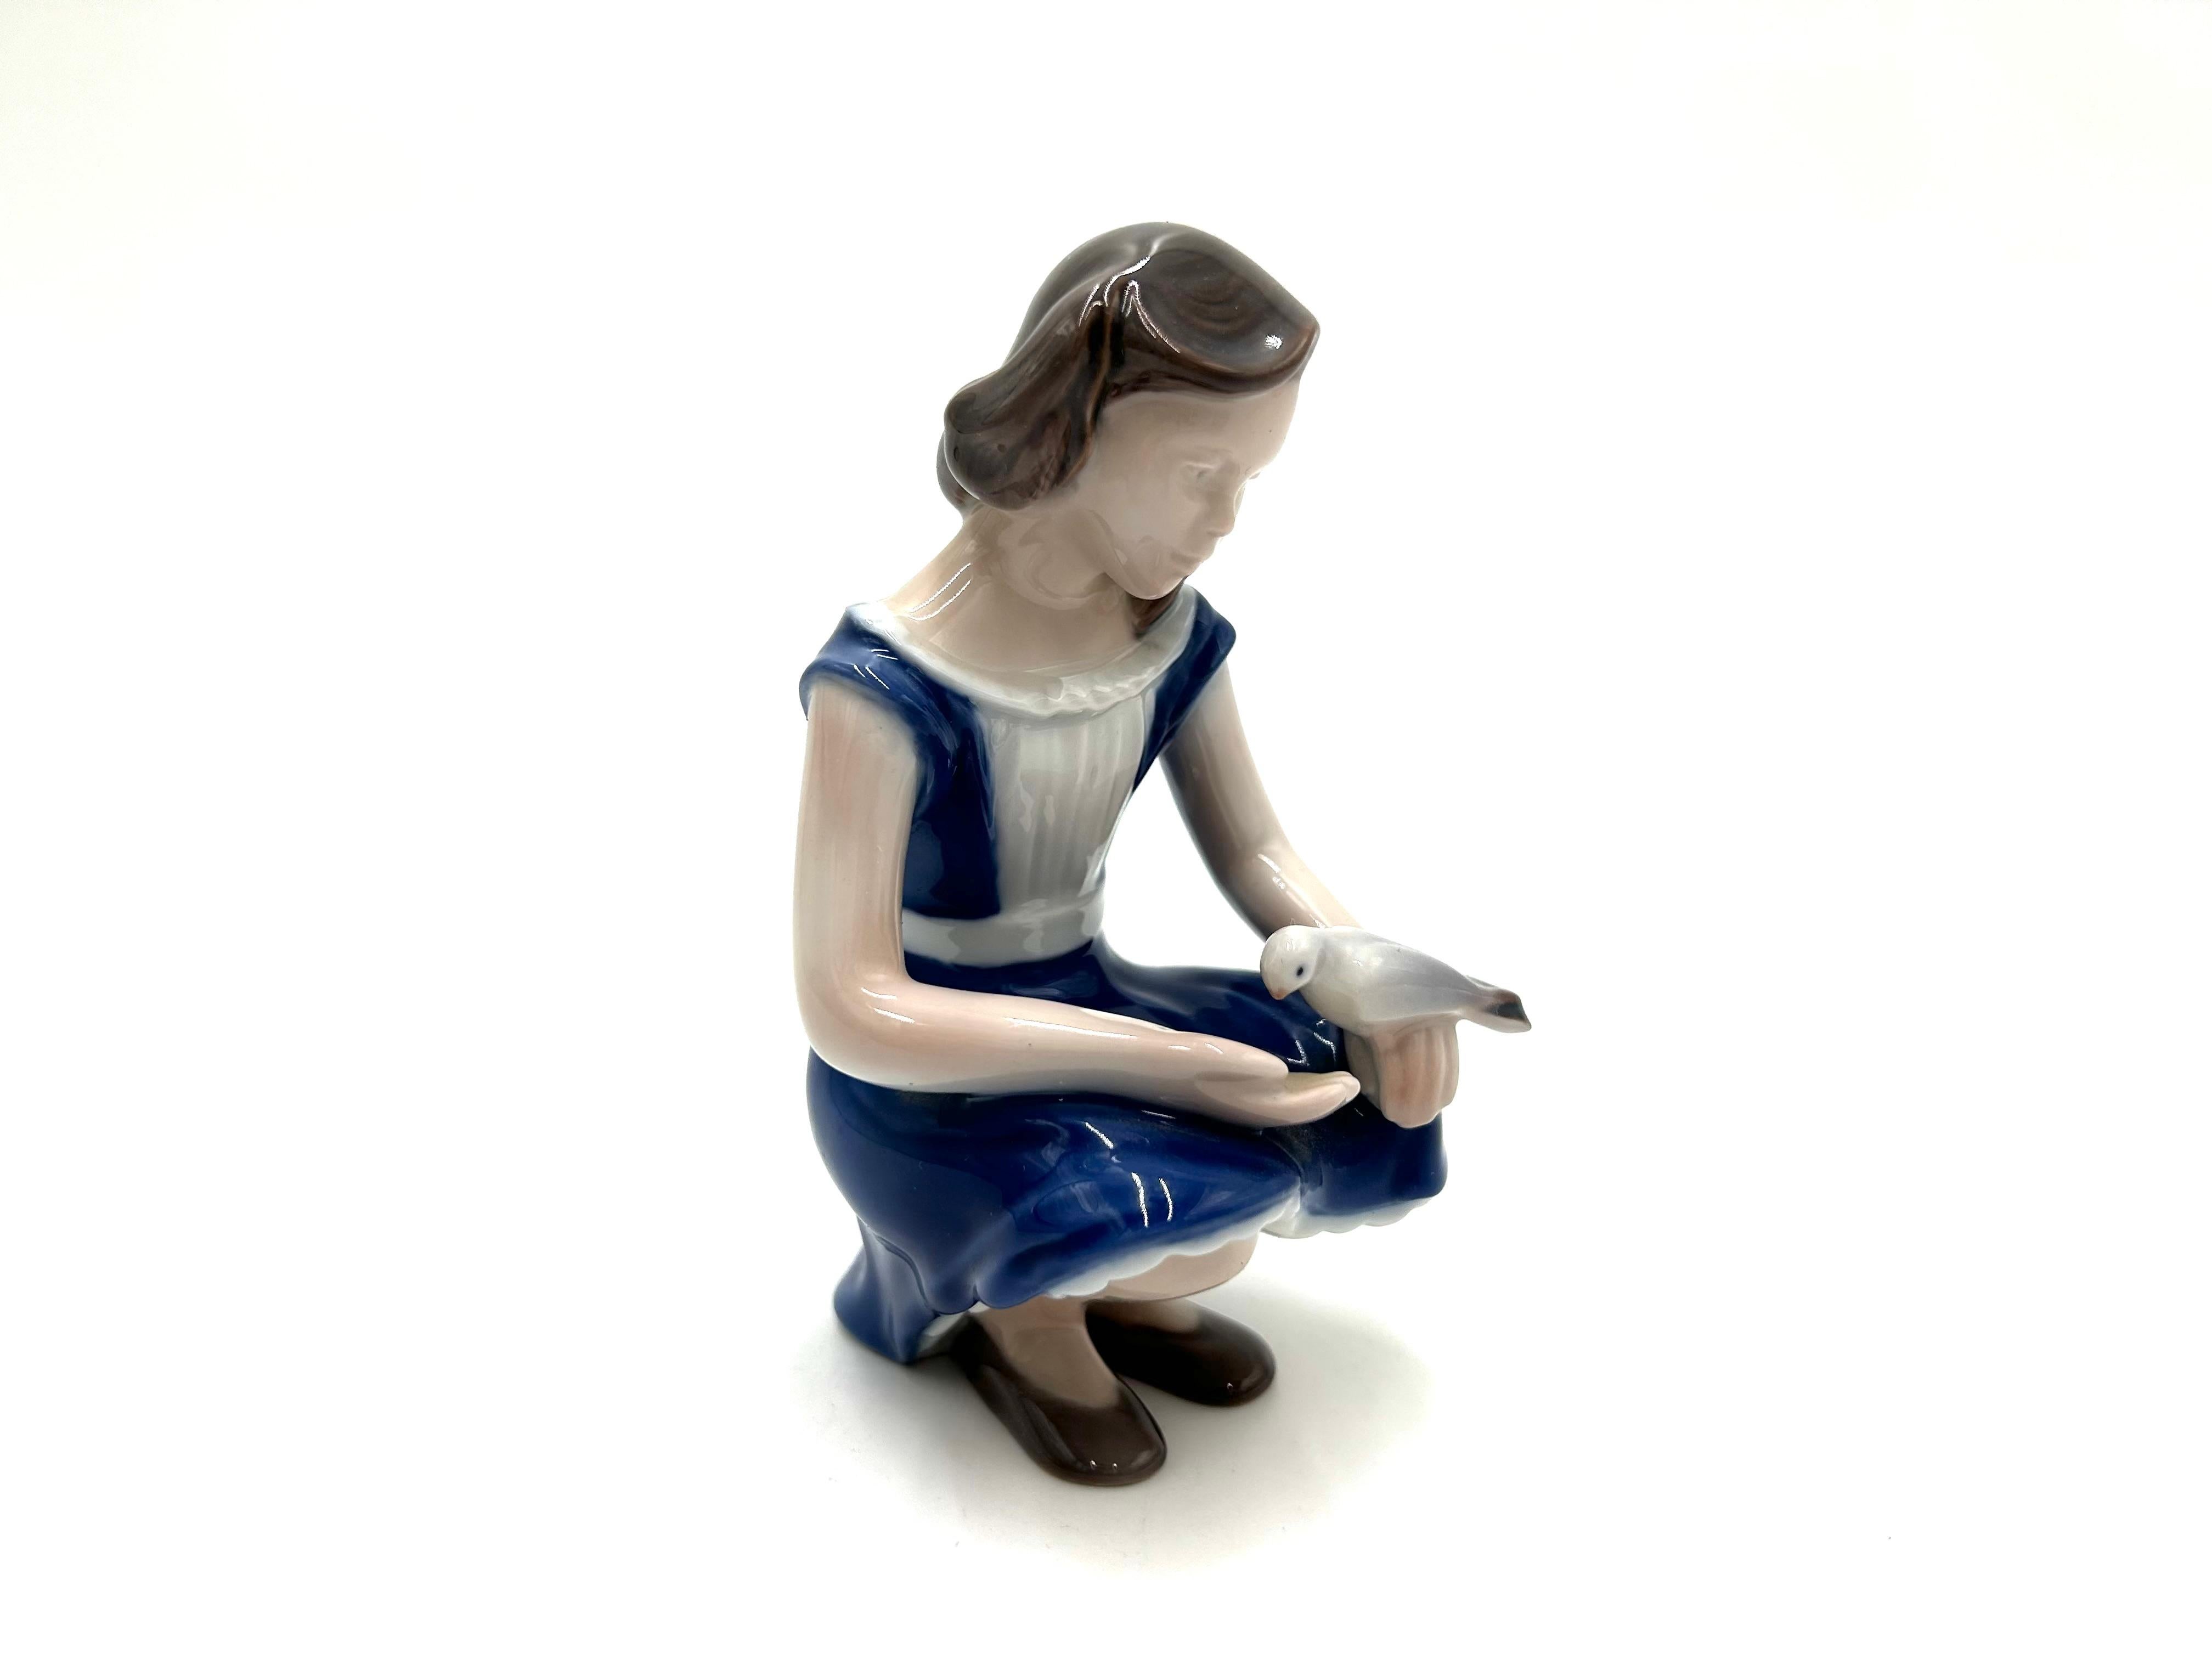 Porcelain figurine of a girl with a bird

Produced by the Danish manufactory Bing & Grondahl

The mark is used in the 1960s.

Very good condition without damage

height: 13cm

width: 8cm

depth: 8cm.